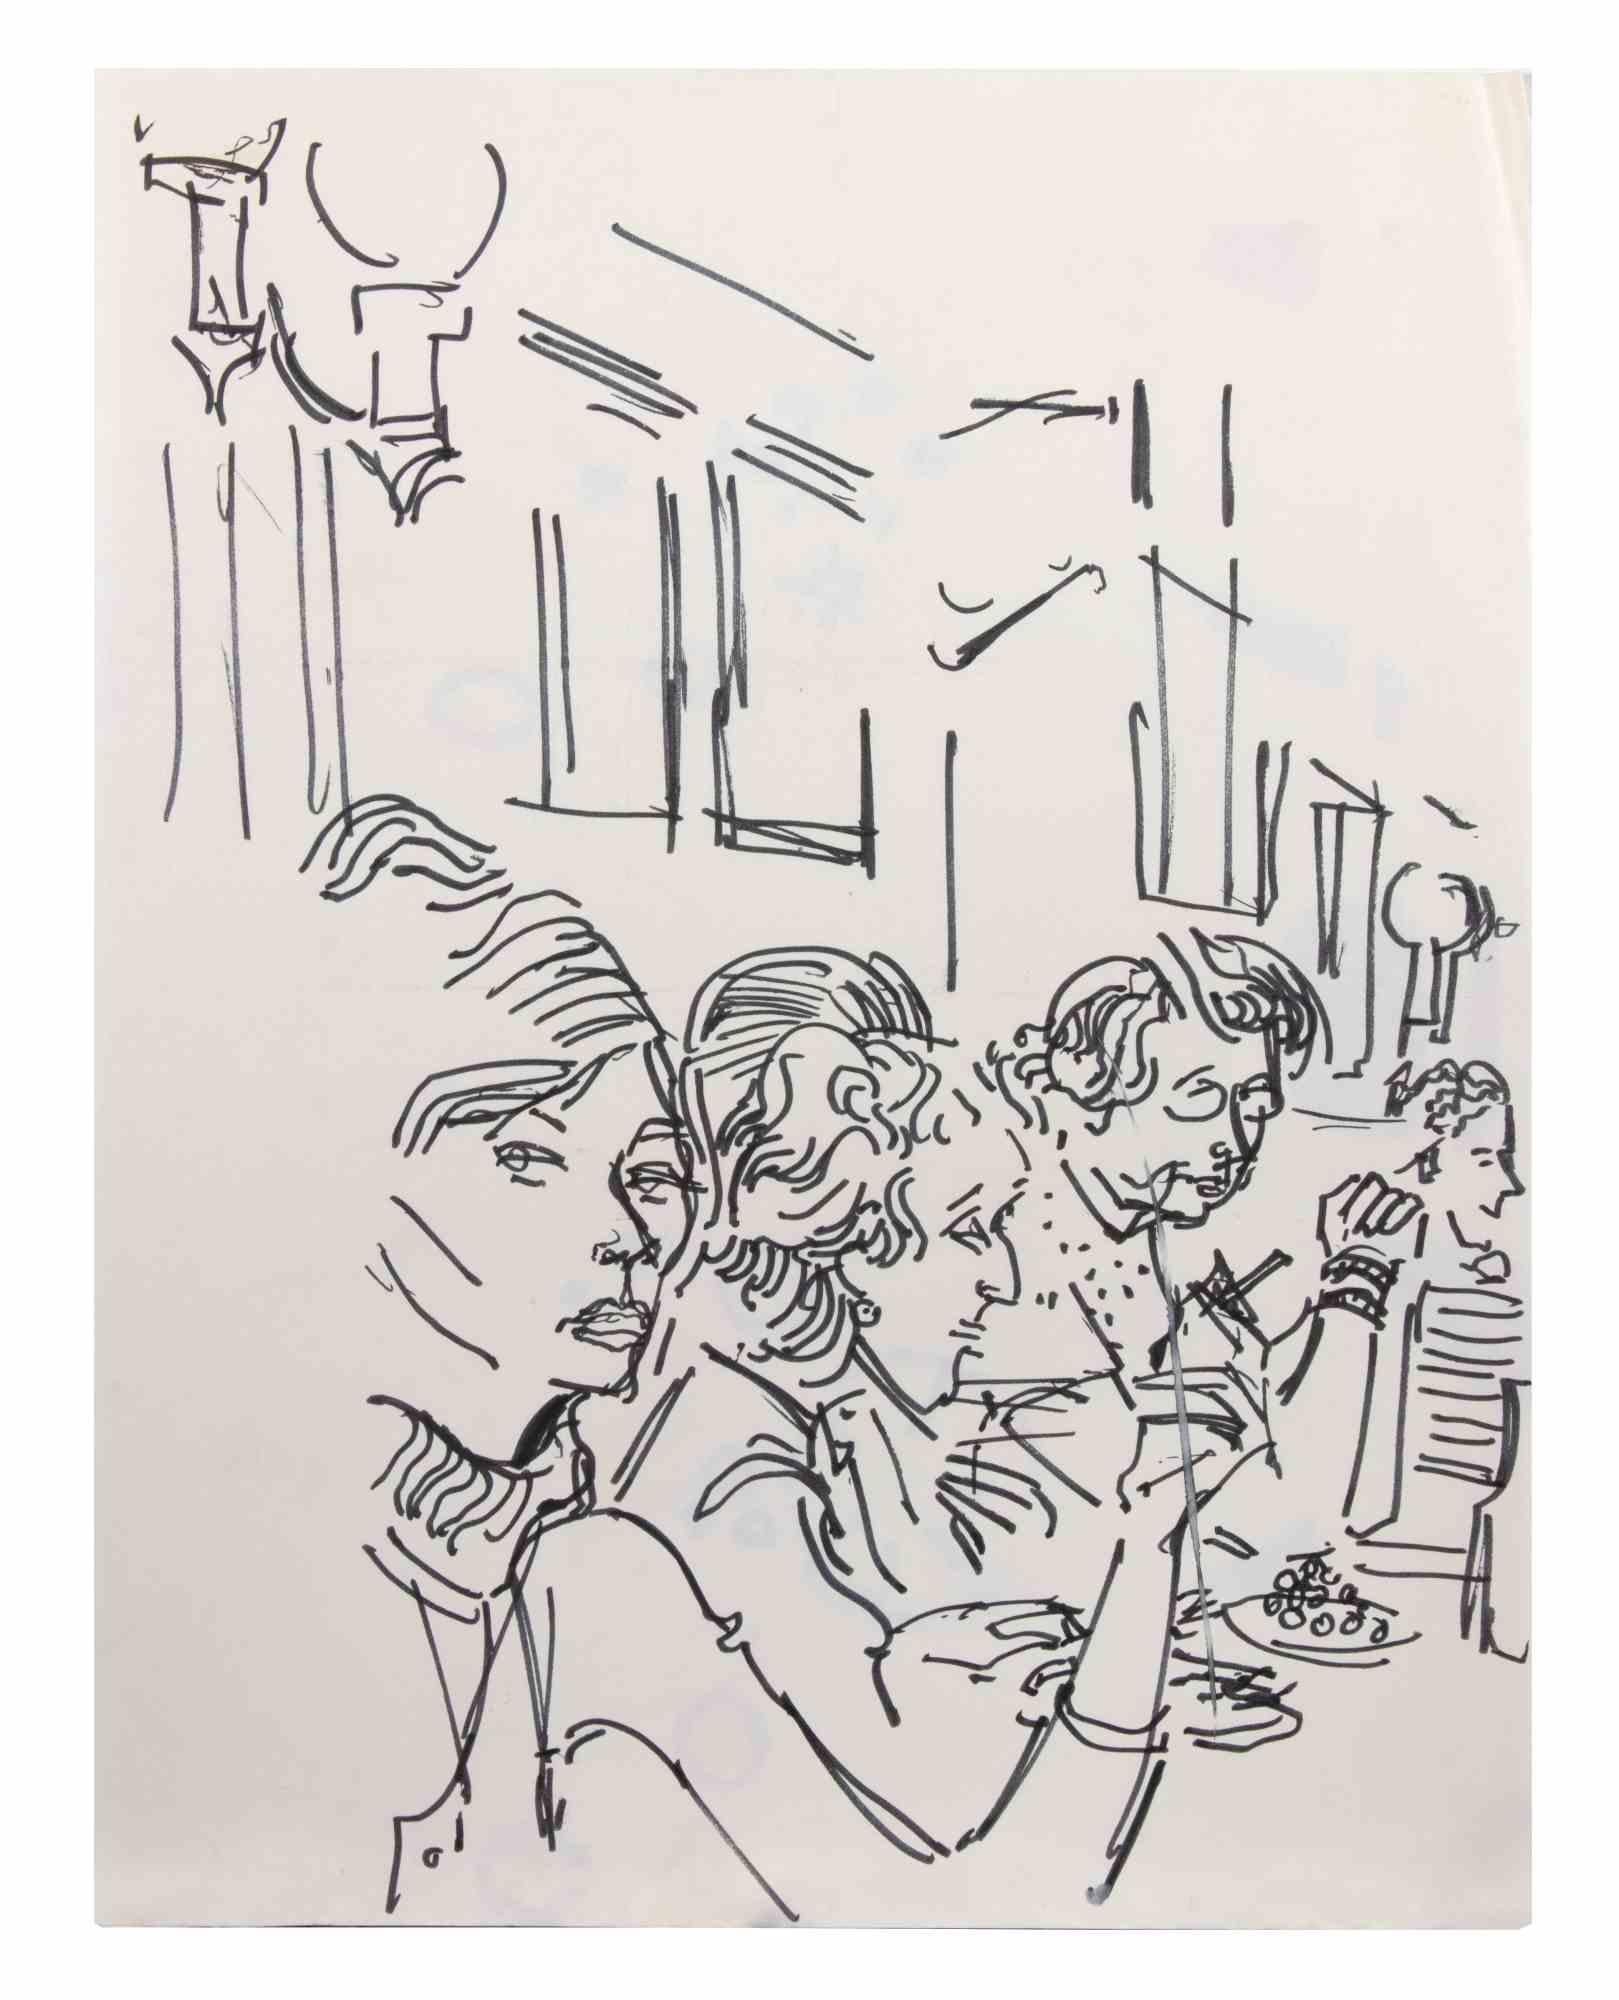 The Pub is a China Ink Drawing realized by Reynold Arnould  (Le Havre 1919 - Parigi 1980).

Good condition on a white paper.

No Signature.

Reynold Arnould was born in Le Havre, France in 1919. He studied at l'École des Beaux-Arts de Le Havre, and